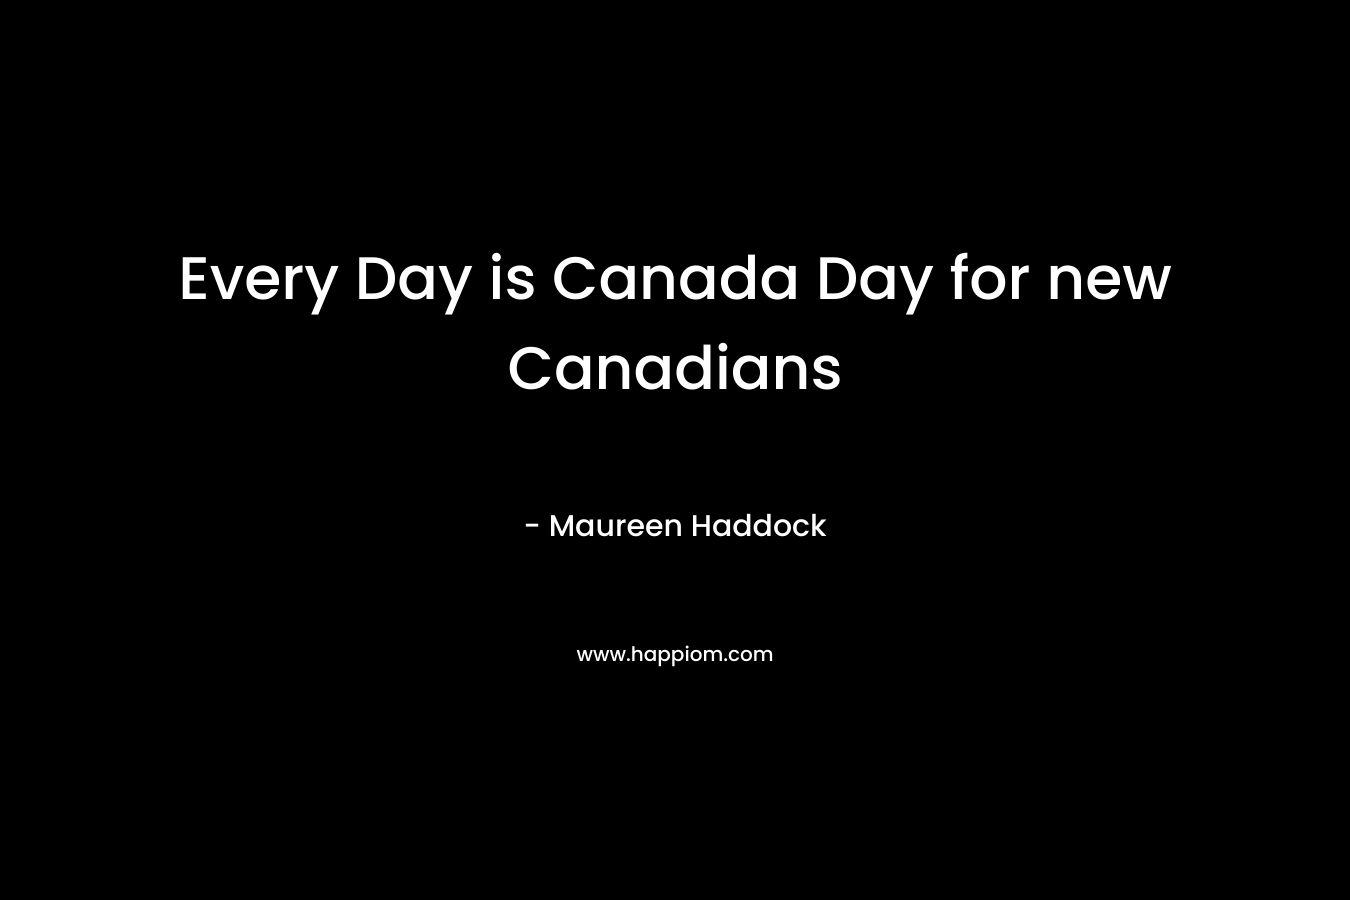 Every Day is Canada Day for new Canadians – Maureen Haddock